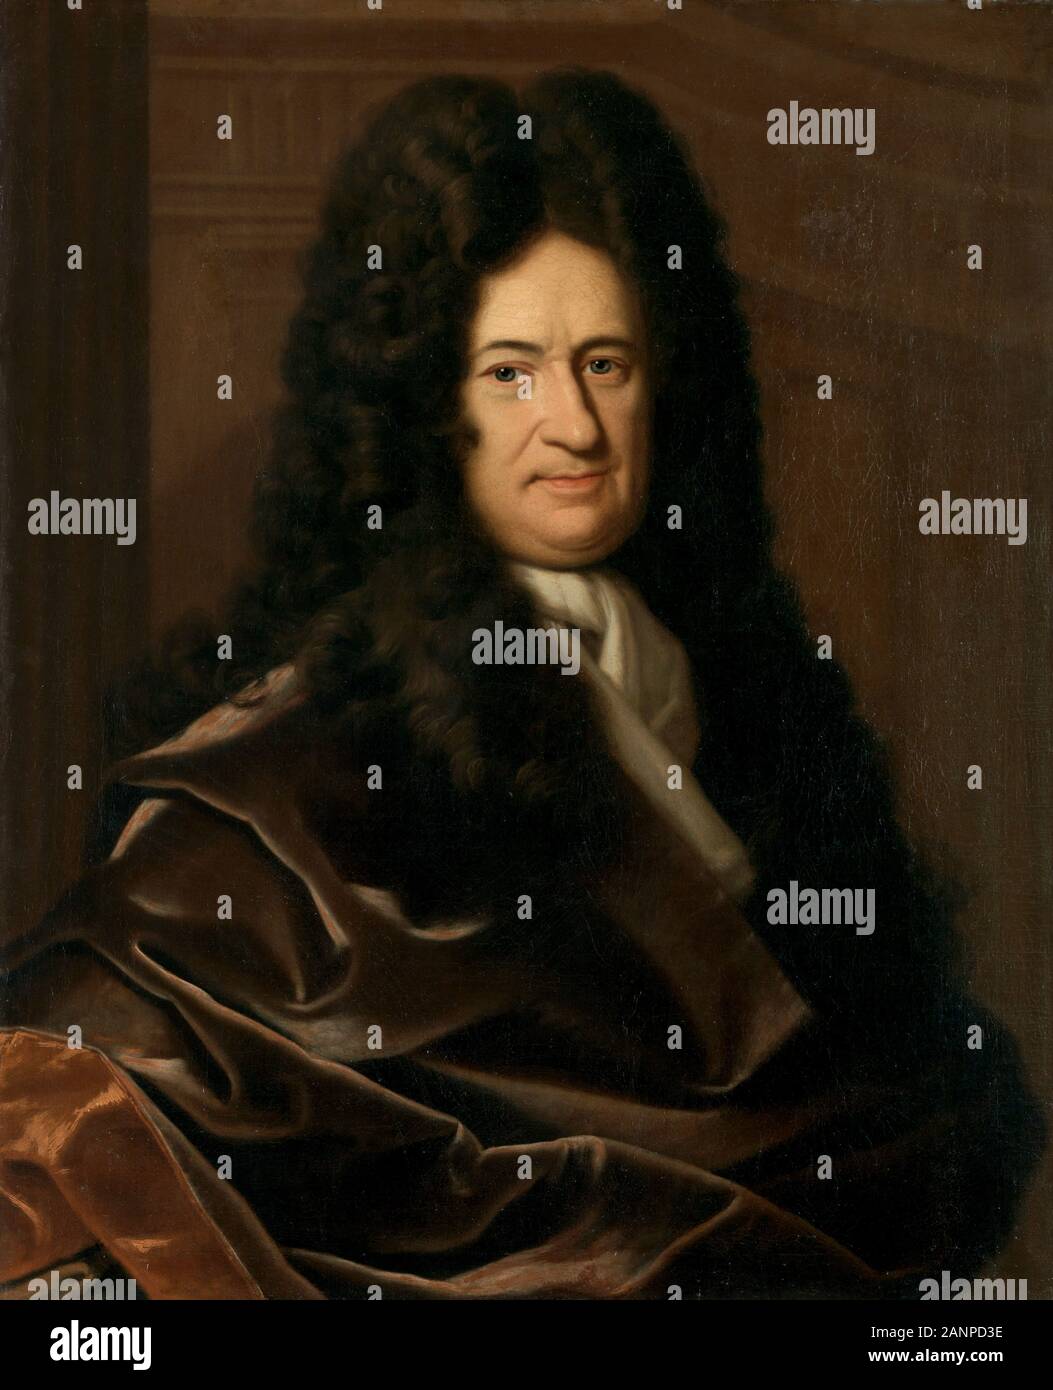 Gottfried Wilhelm von Leibniz (1646 – 1716) prominent German polymath and one of the most important logicians, mathematicians and natural philosophers of the Enlightenment. Stock Photo